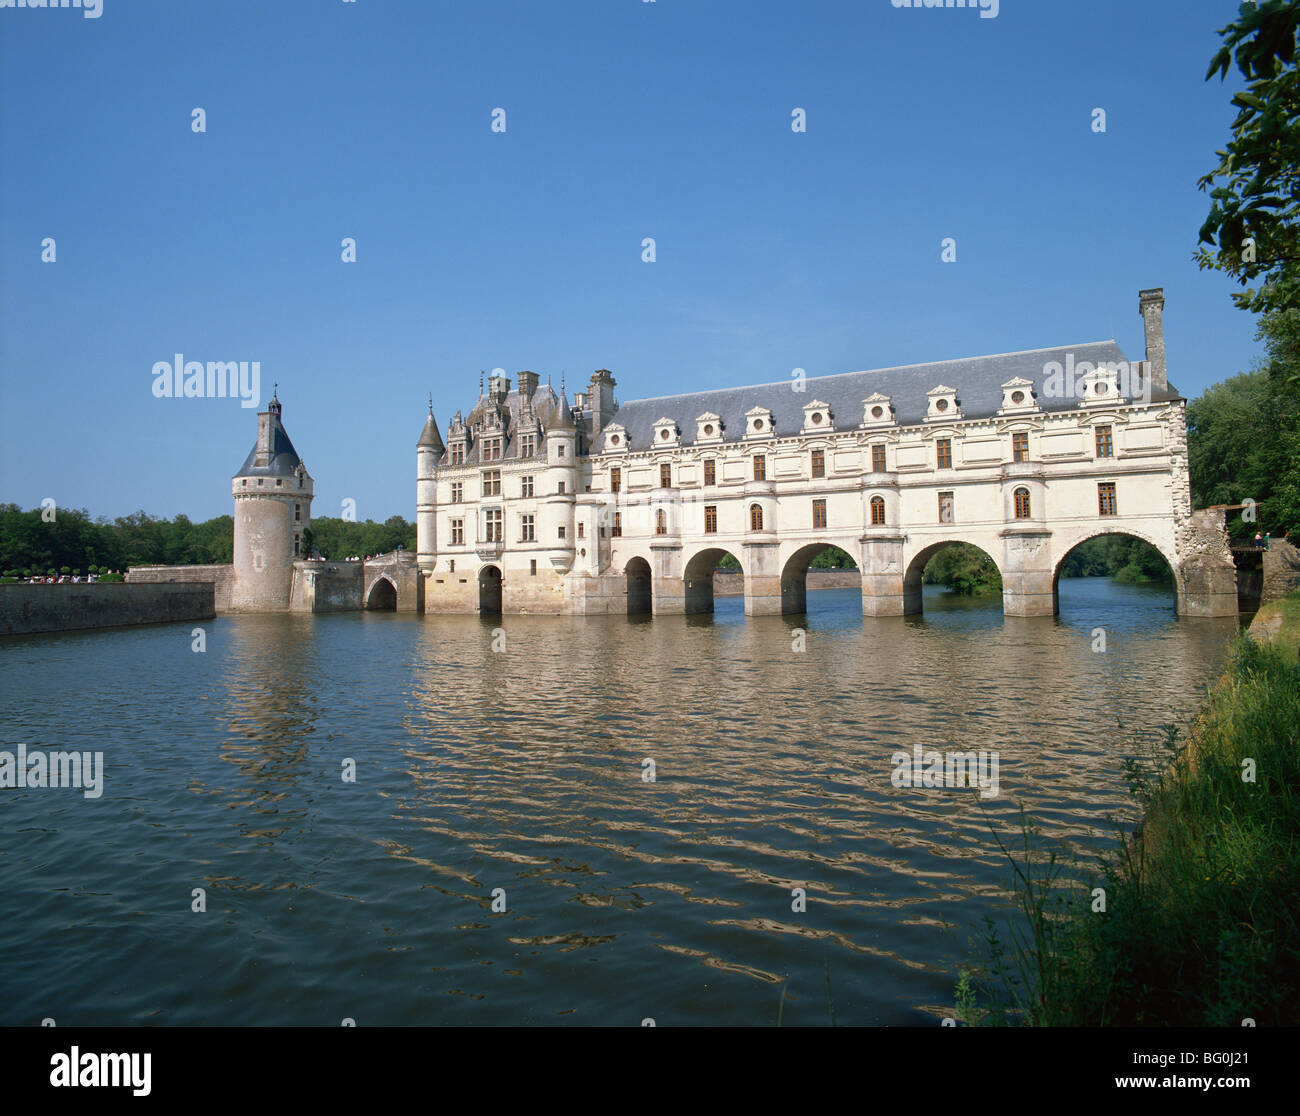 Chateau de Chenonceau, with arches over the River Cher, Indre-et-Loire, France, Europe Stock Photo